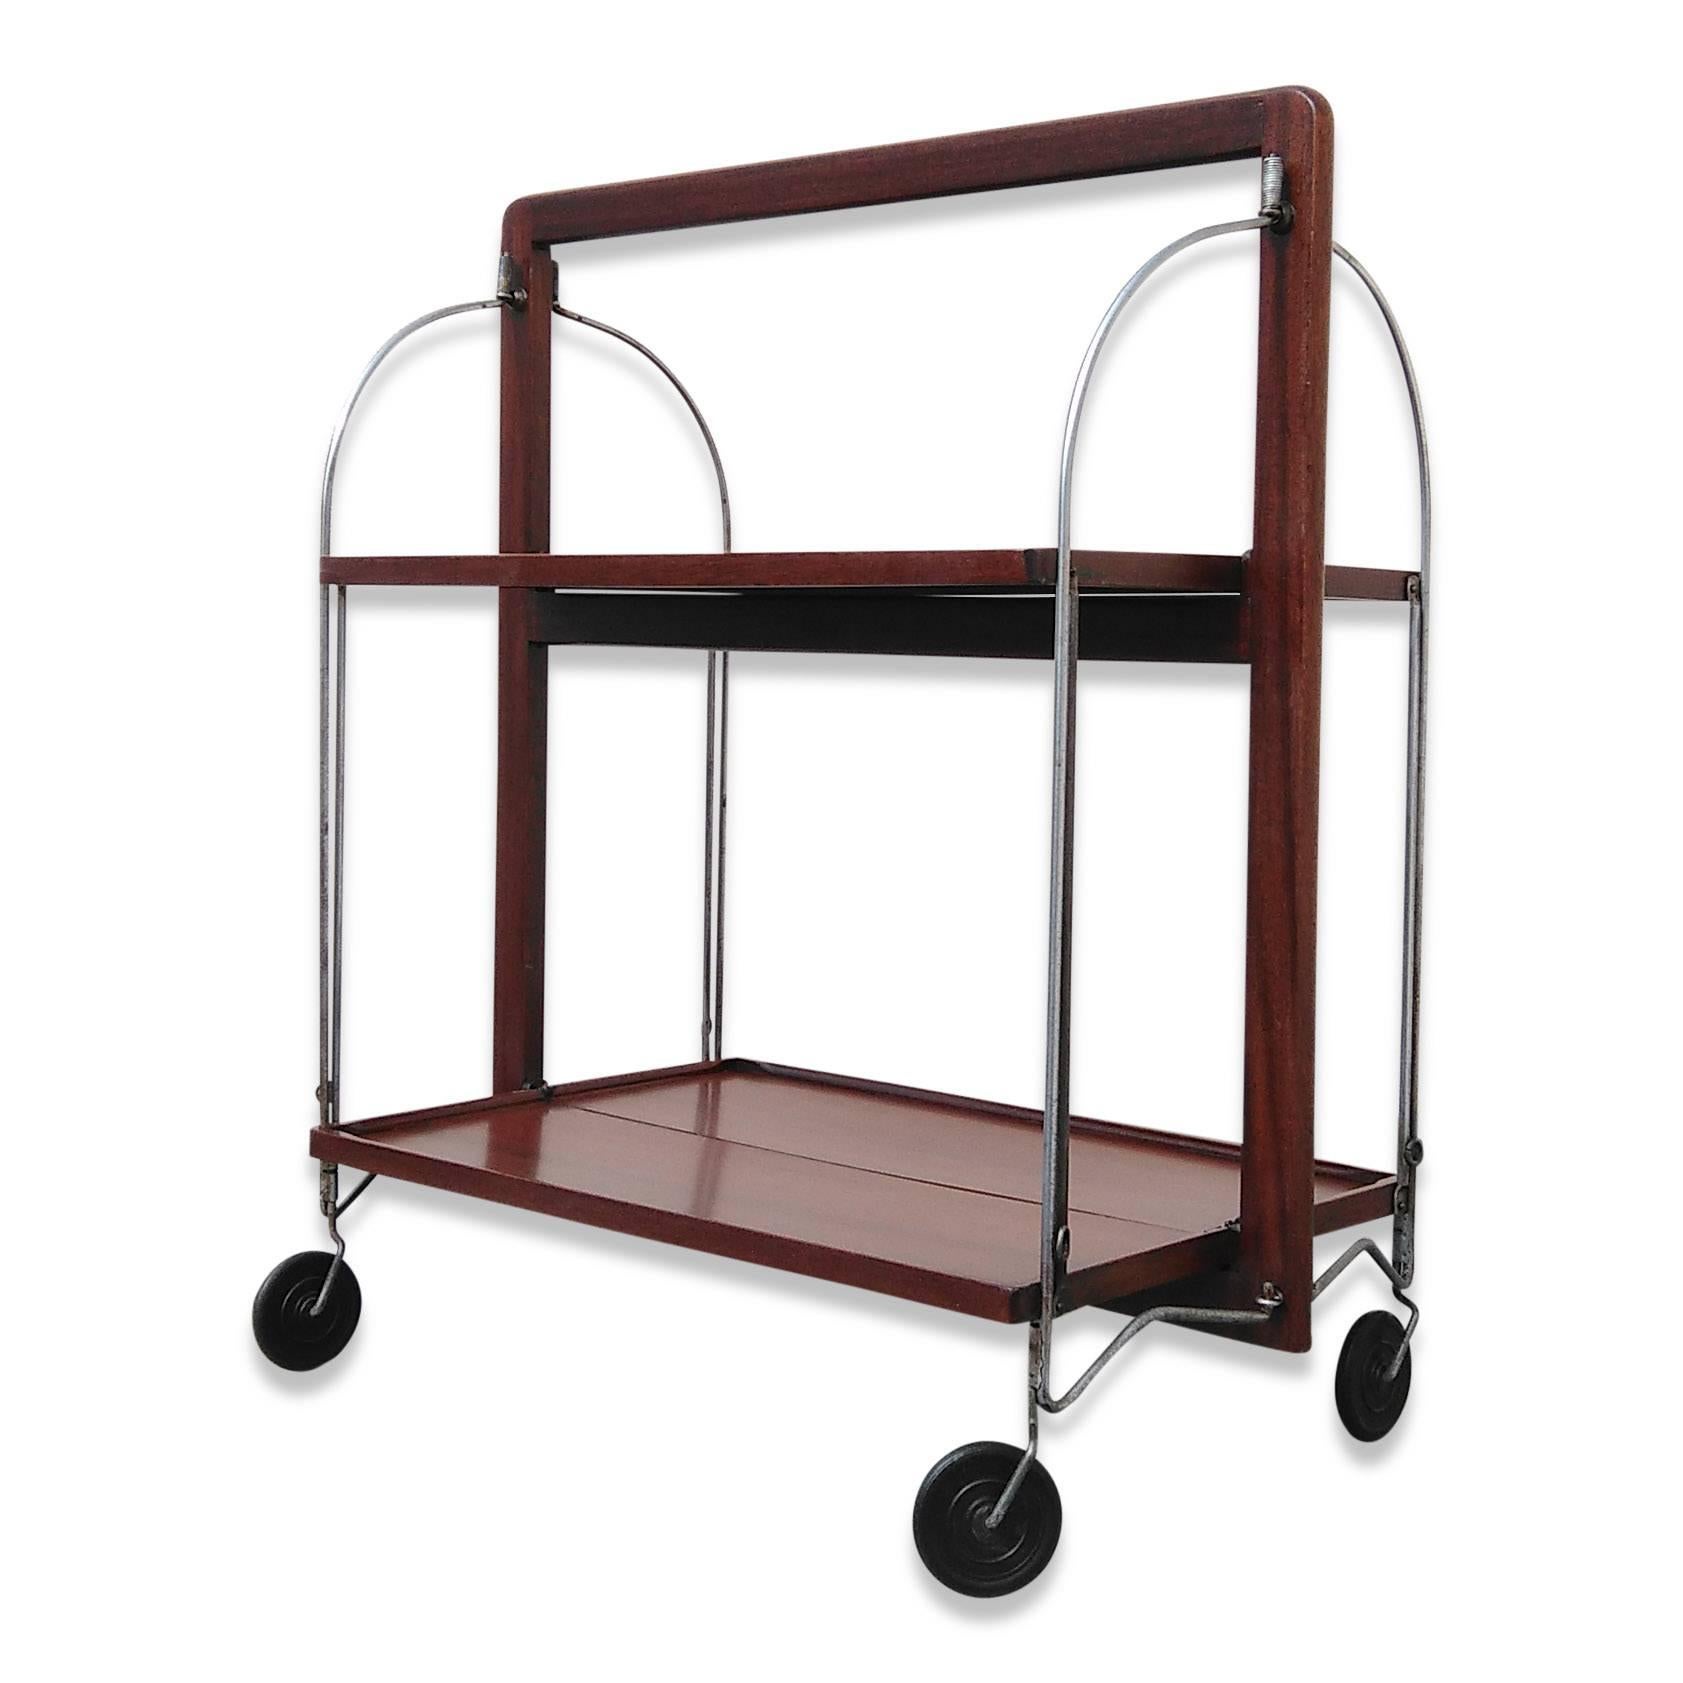 Oak, chrome and rubber wheels foldable cart
Bocado editions
Can be folded by halves or fully
This item will ship from France
Price does not include handling, shipping and possible customs related charges.
 